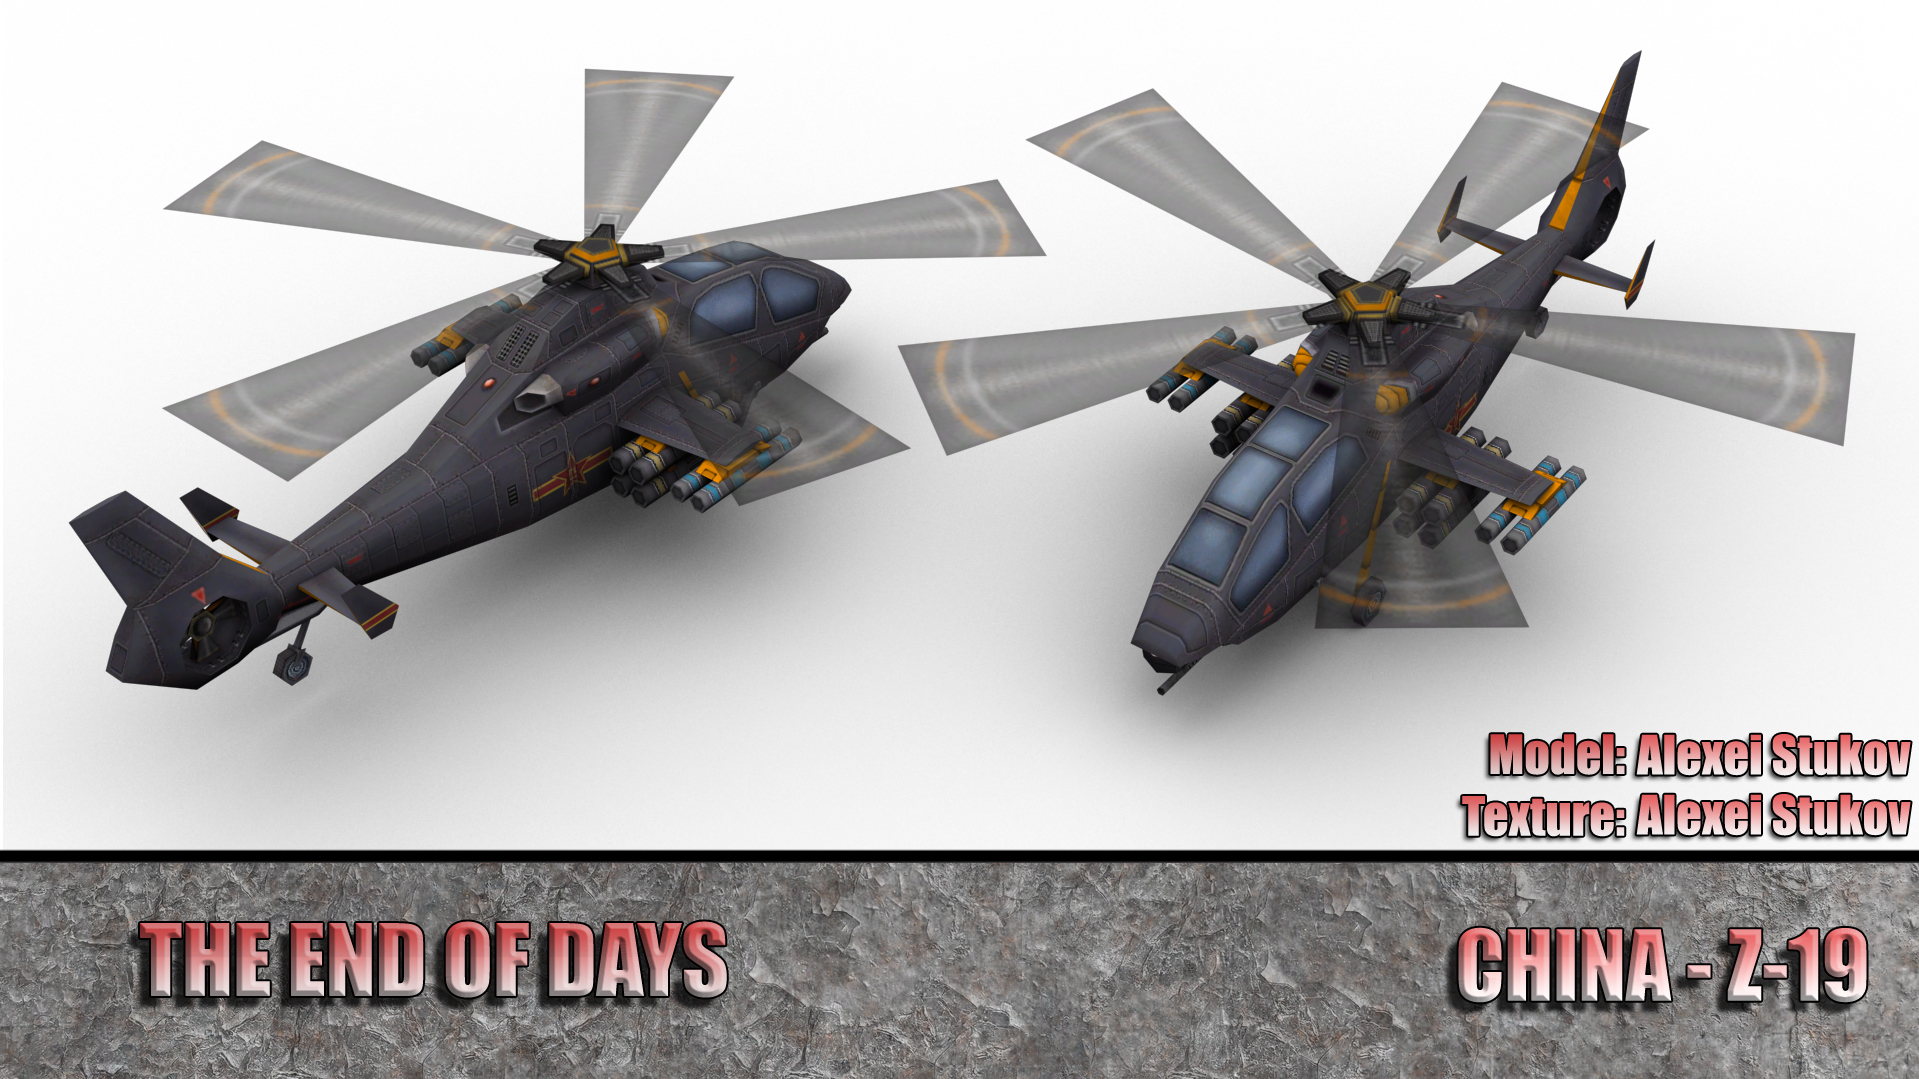 Chinese Z-19 Stealth Attack Helicopter image - The End of Days mod 